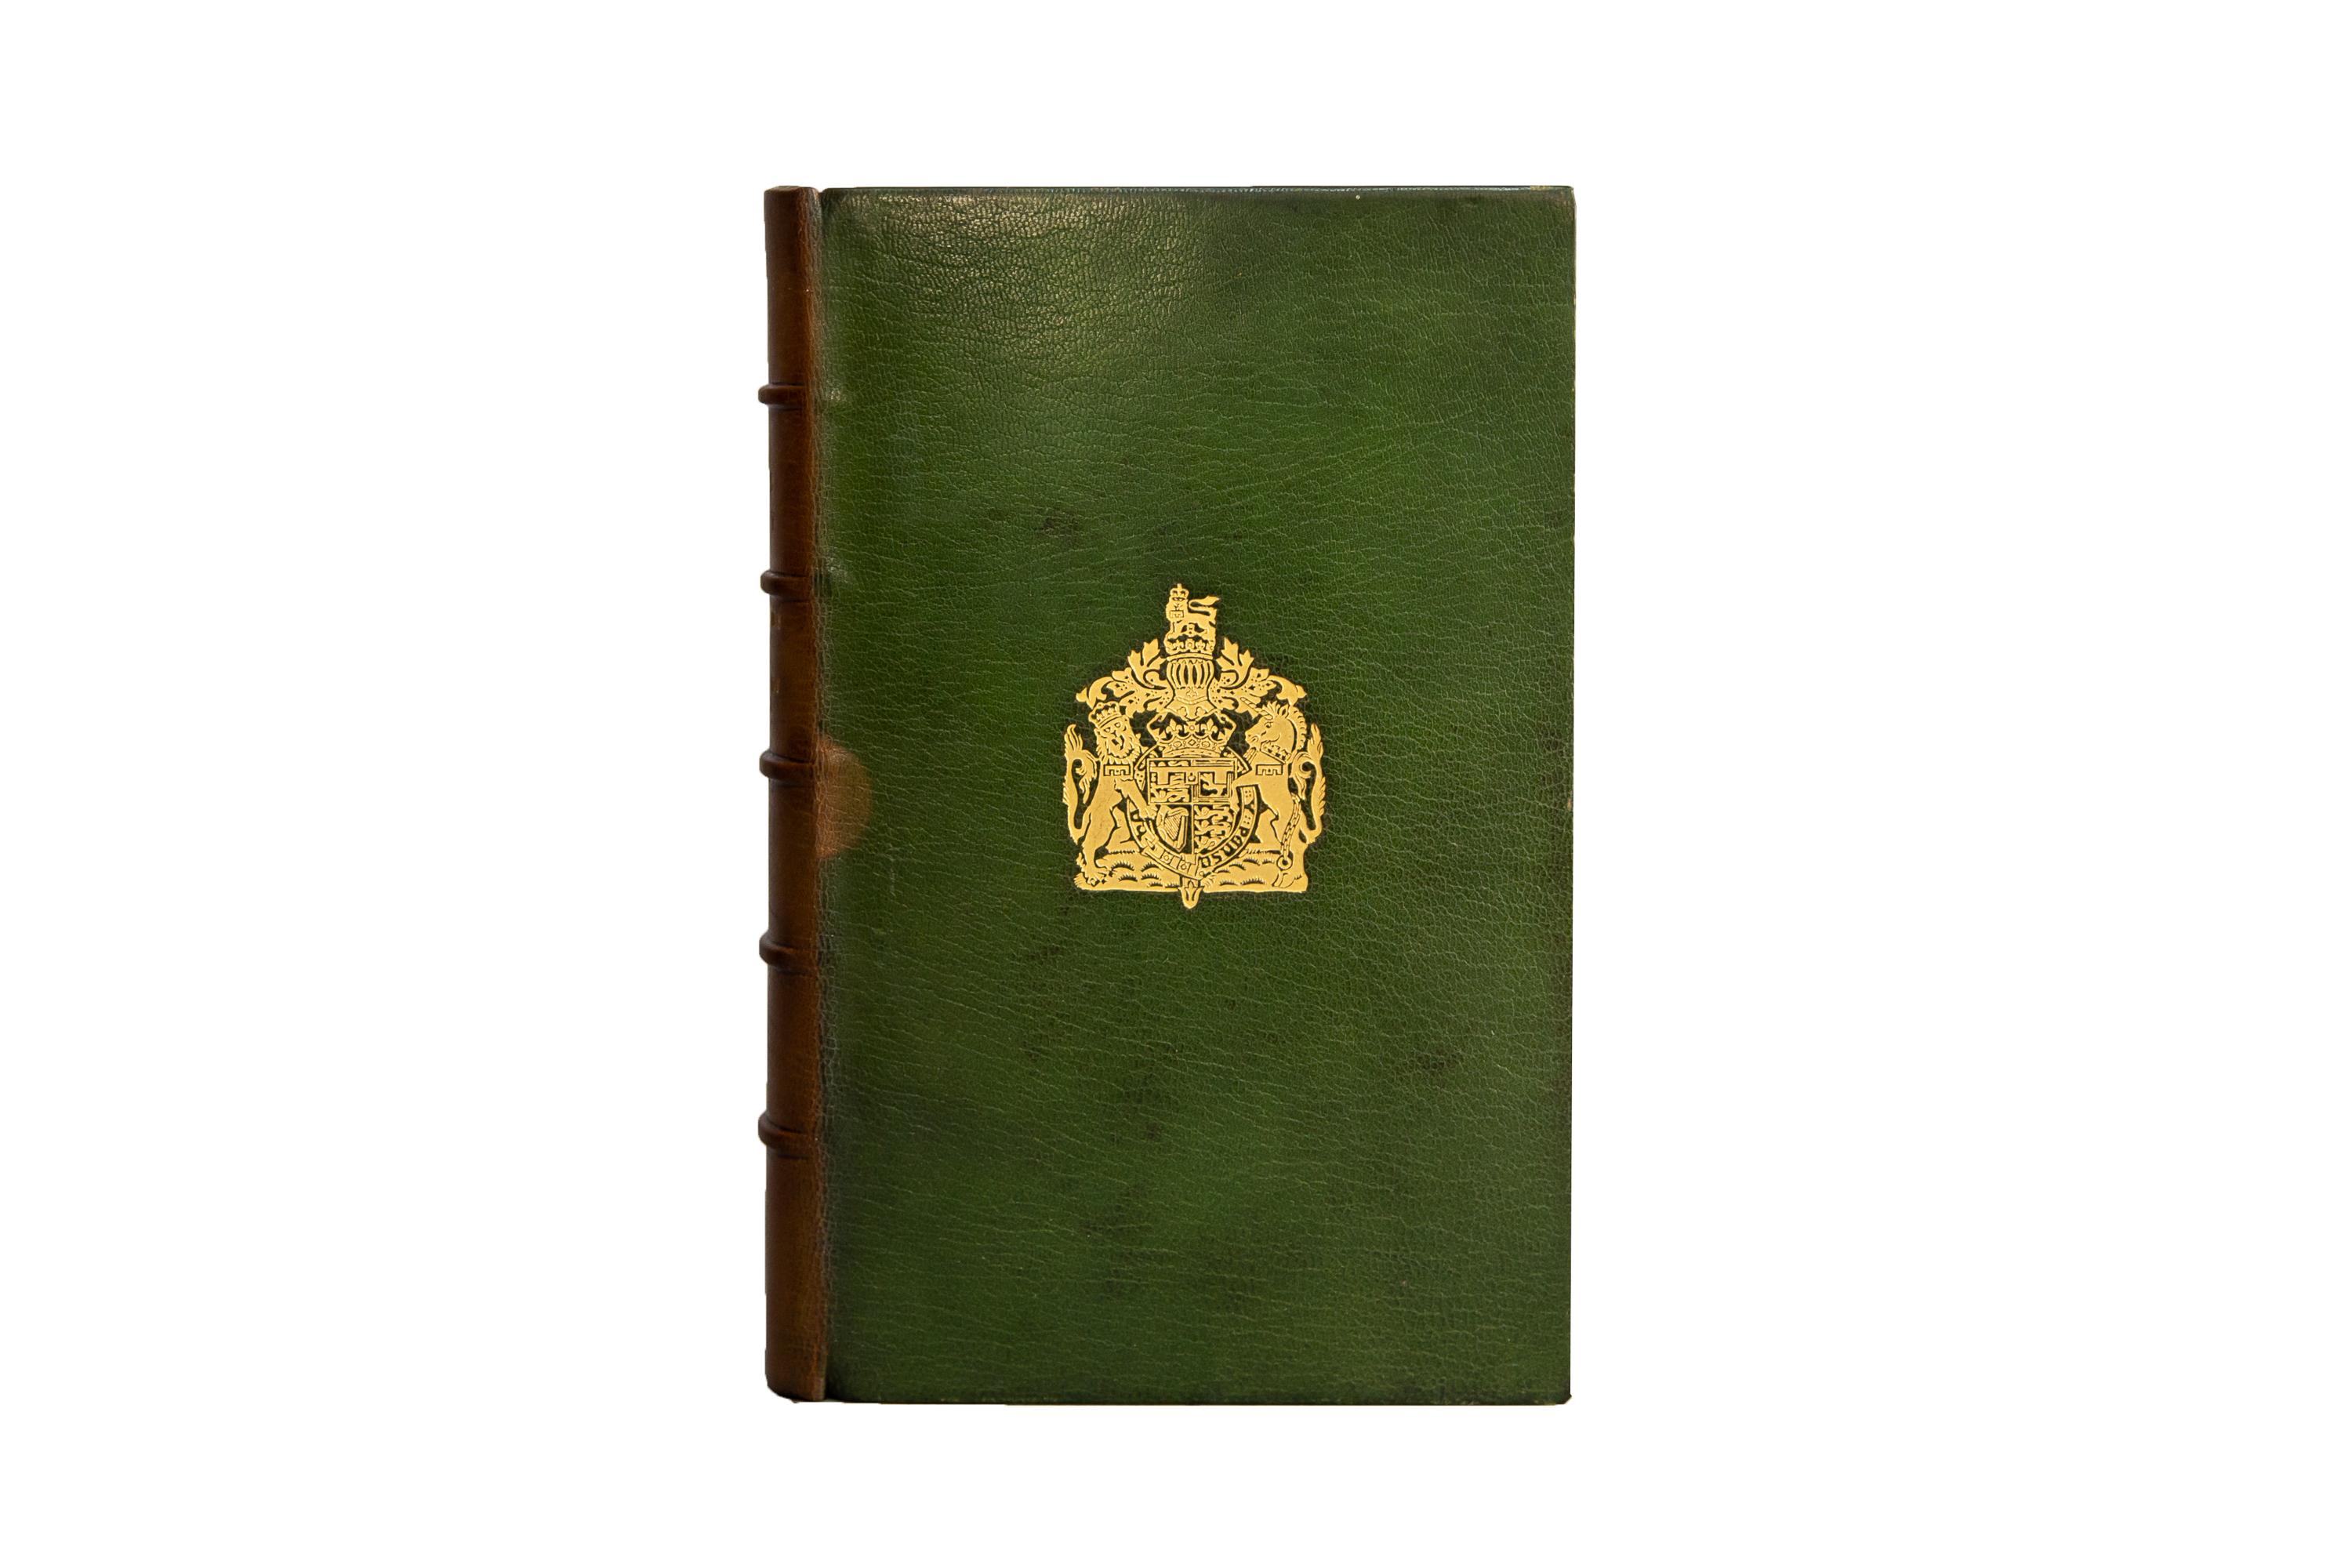 1 Volume. H.R.H. the Duke of Windsor, A King's Story. Signed Limited Edition. Bound in full green morocco with the front cover displaying a royal crest in gilt. Raised band spine with labels displaying lettering in gilt. The top edge is gilt. This